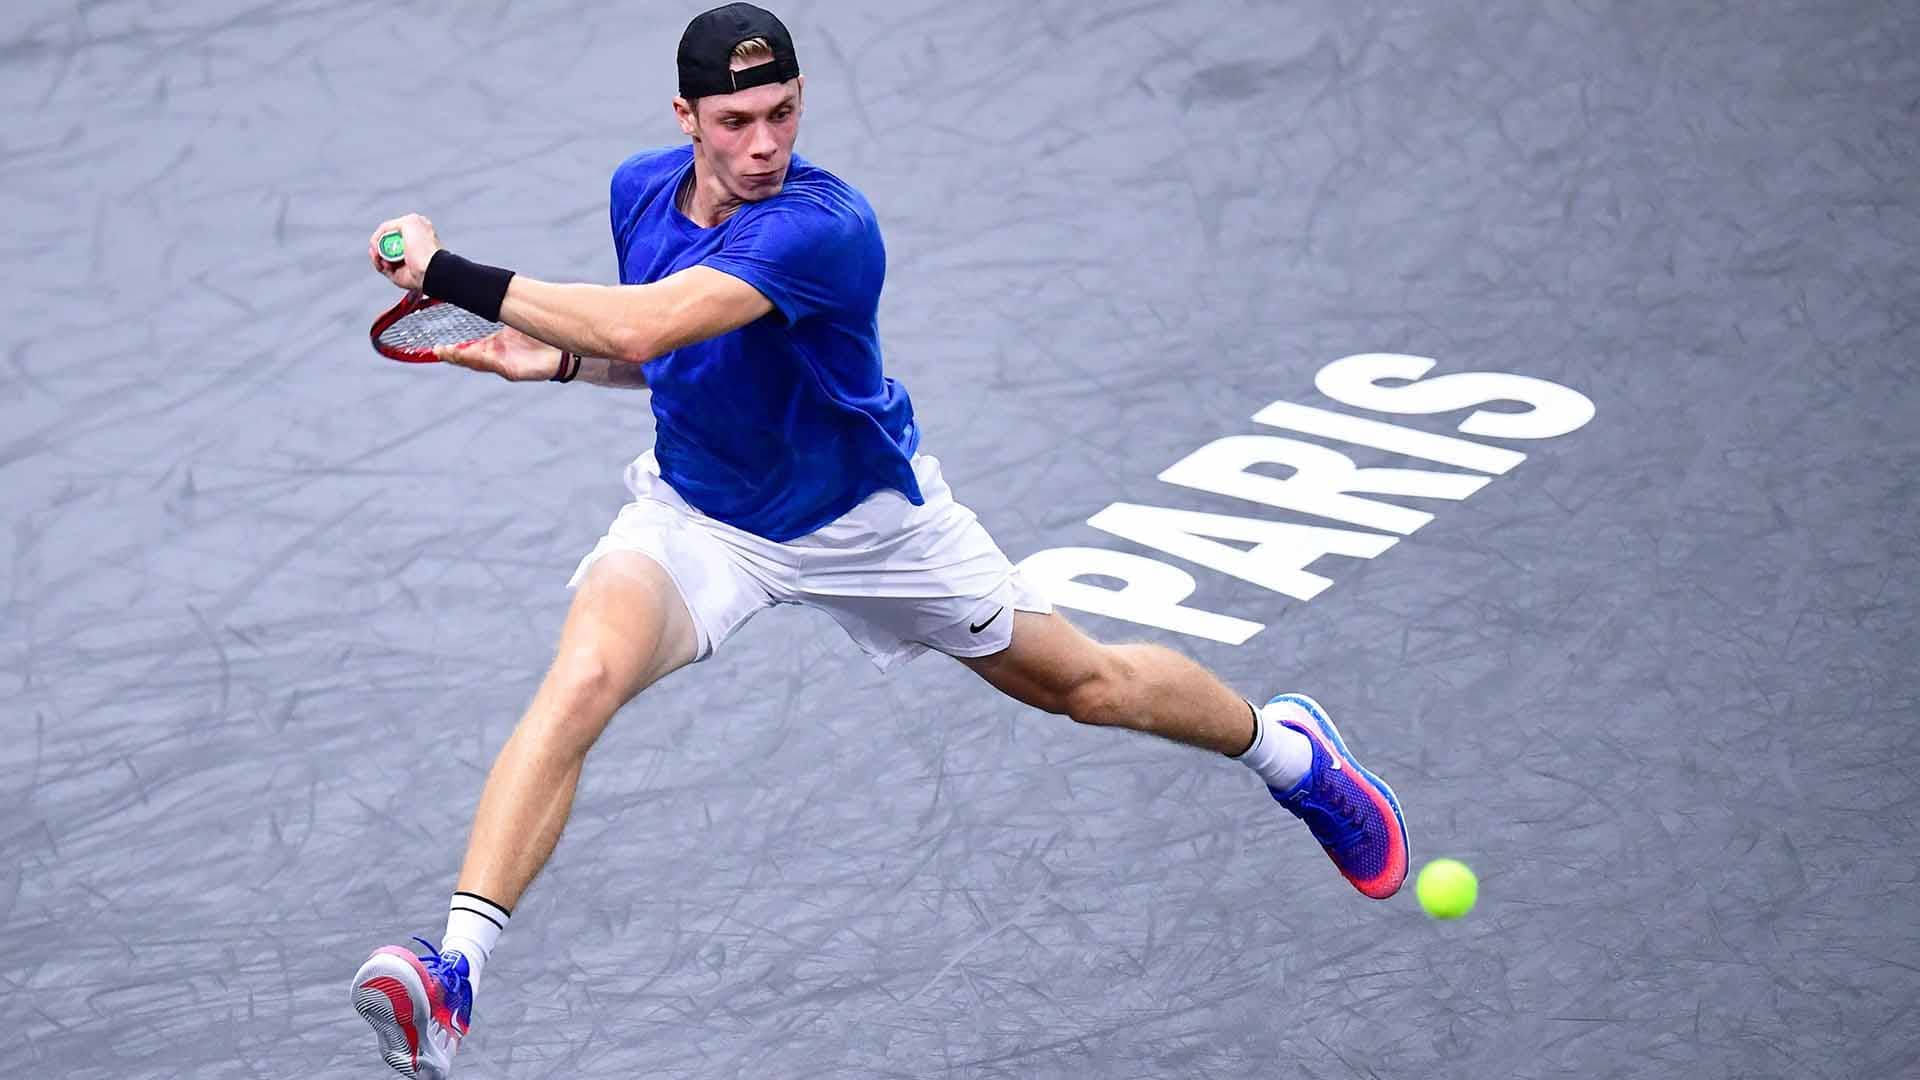 <a href='https://www.atptour.com/en/players/denis-shapovalov/su55/overview'>Denis Shapovalov</a> is aiming to lift his first ATP Masters 1000 title at the <a href='https://www.atptour.com/en/tournaments/paris/352/overview'>Rolex Paris Masters</a> this week.